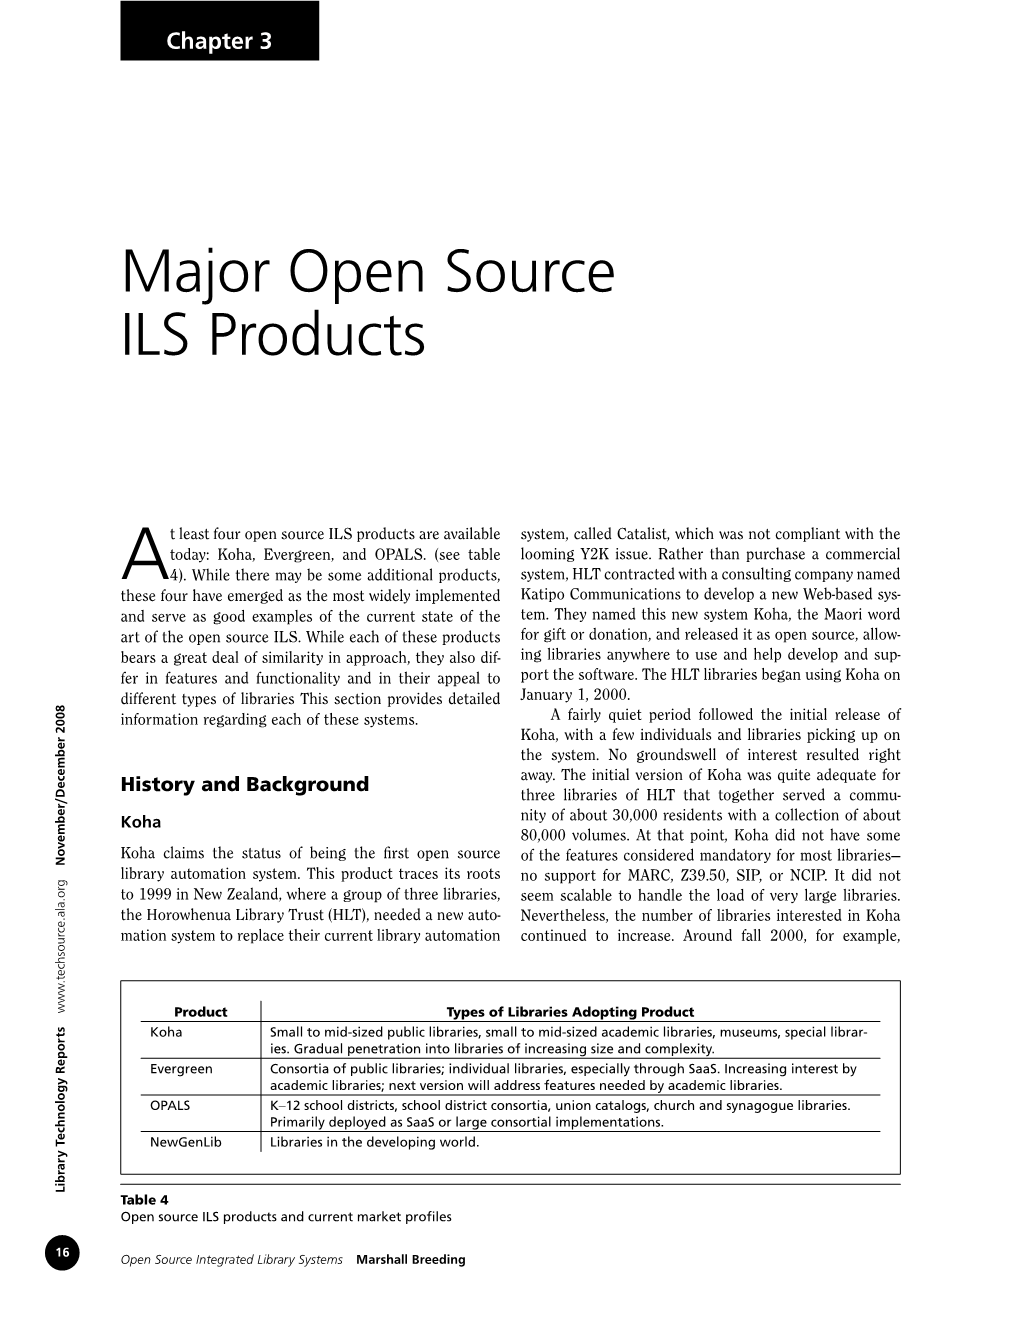 Major Open Source ILS Products